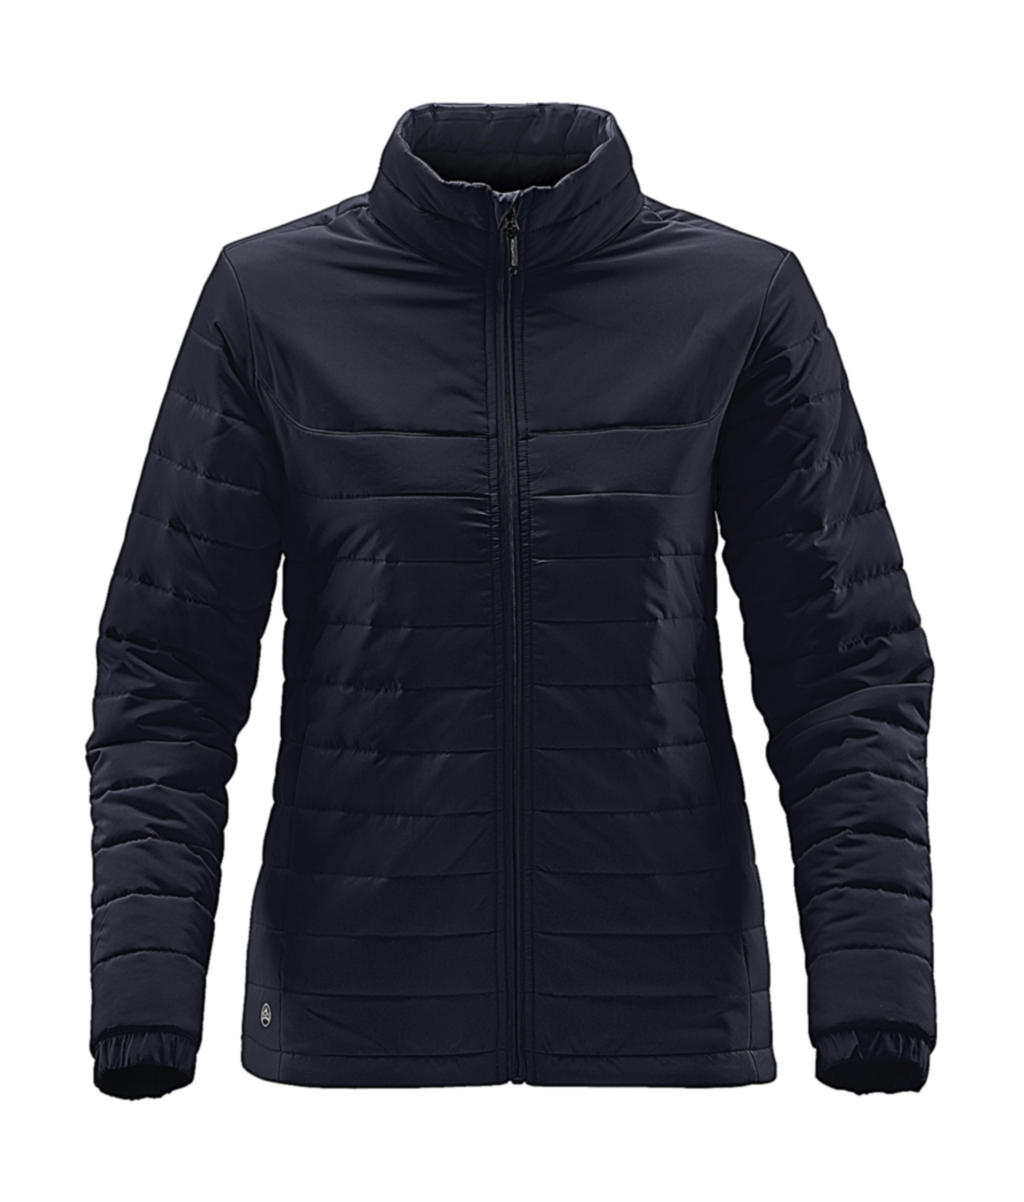  Womens Nautilus Thermal Jacket in Farbe Navy